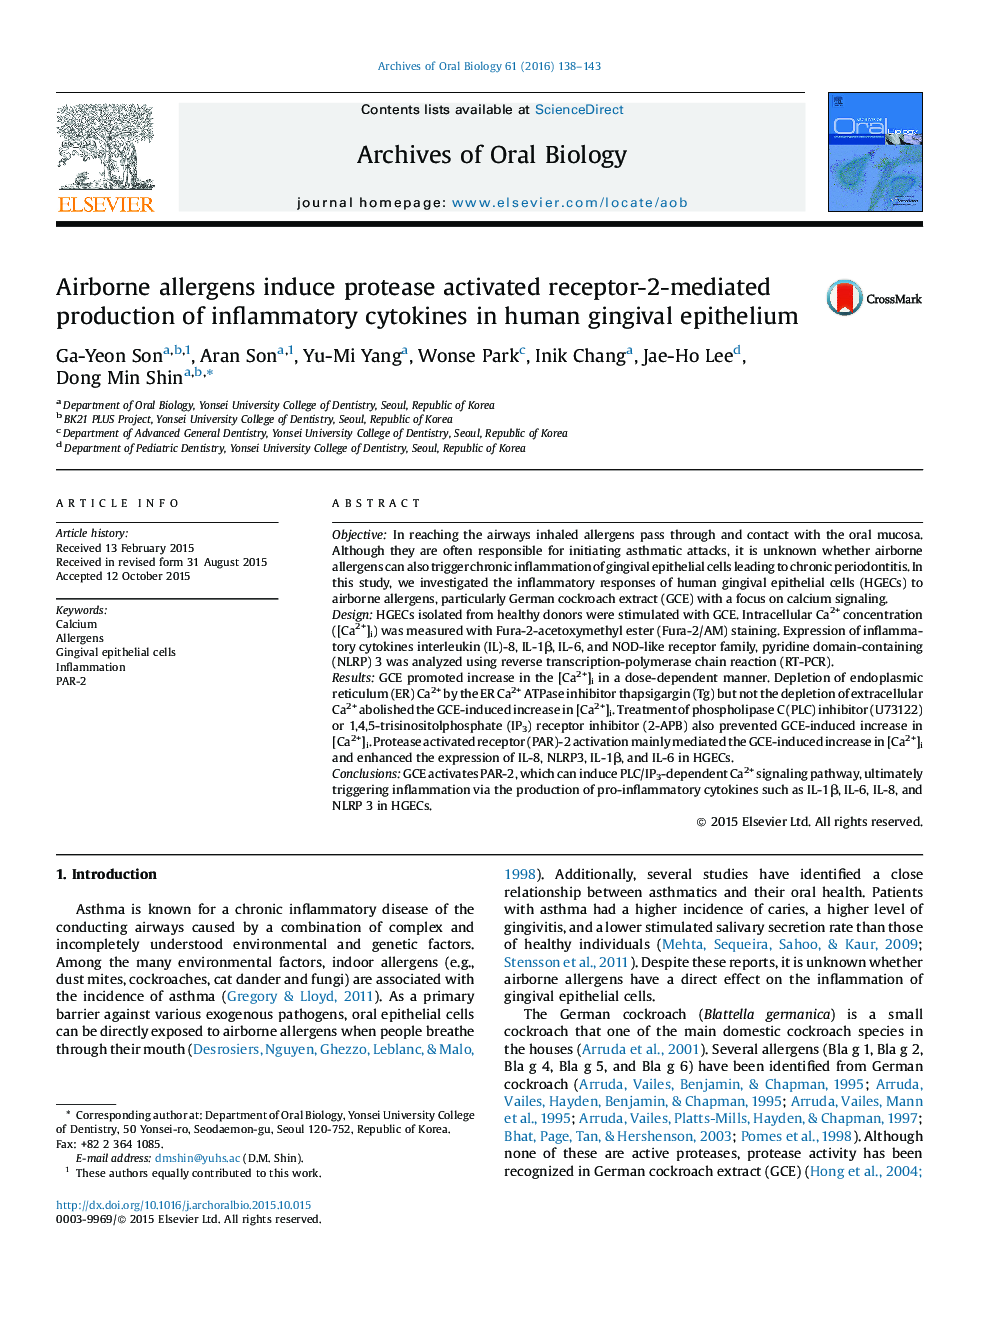 Airborne allergens induce protease activated receptor-2-mediated production of inflammatory cytokines in human gingival epithelium